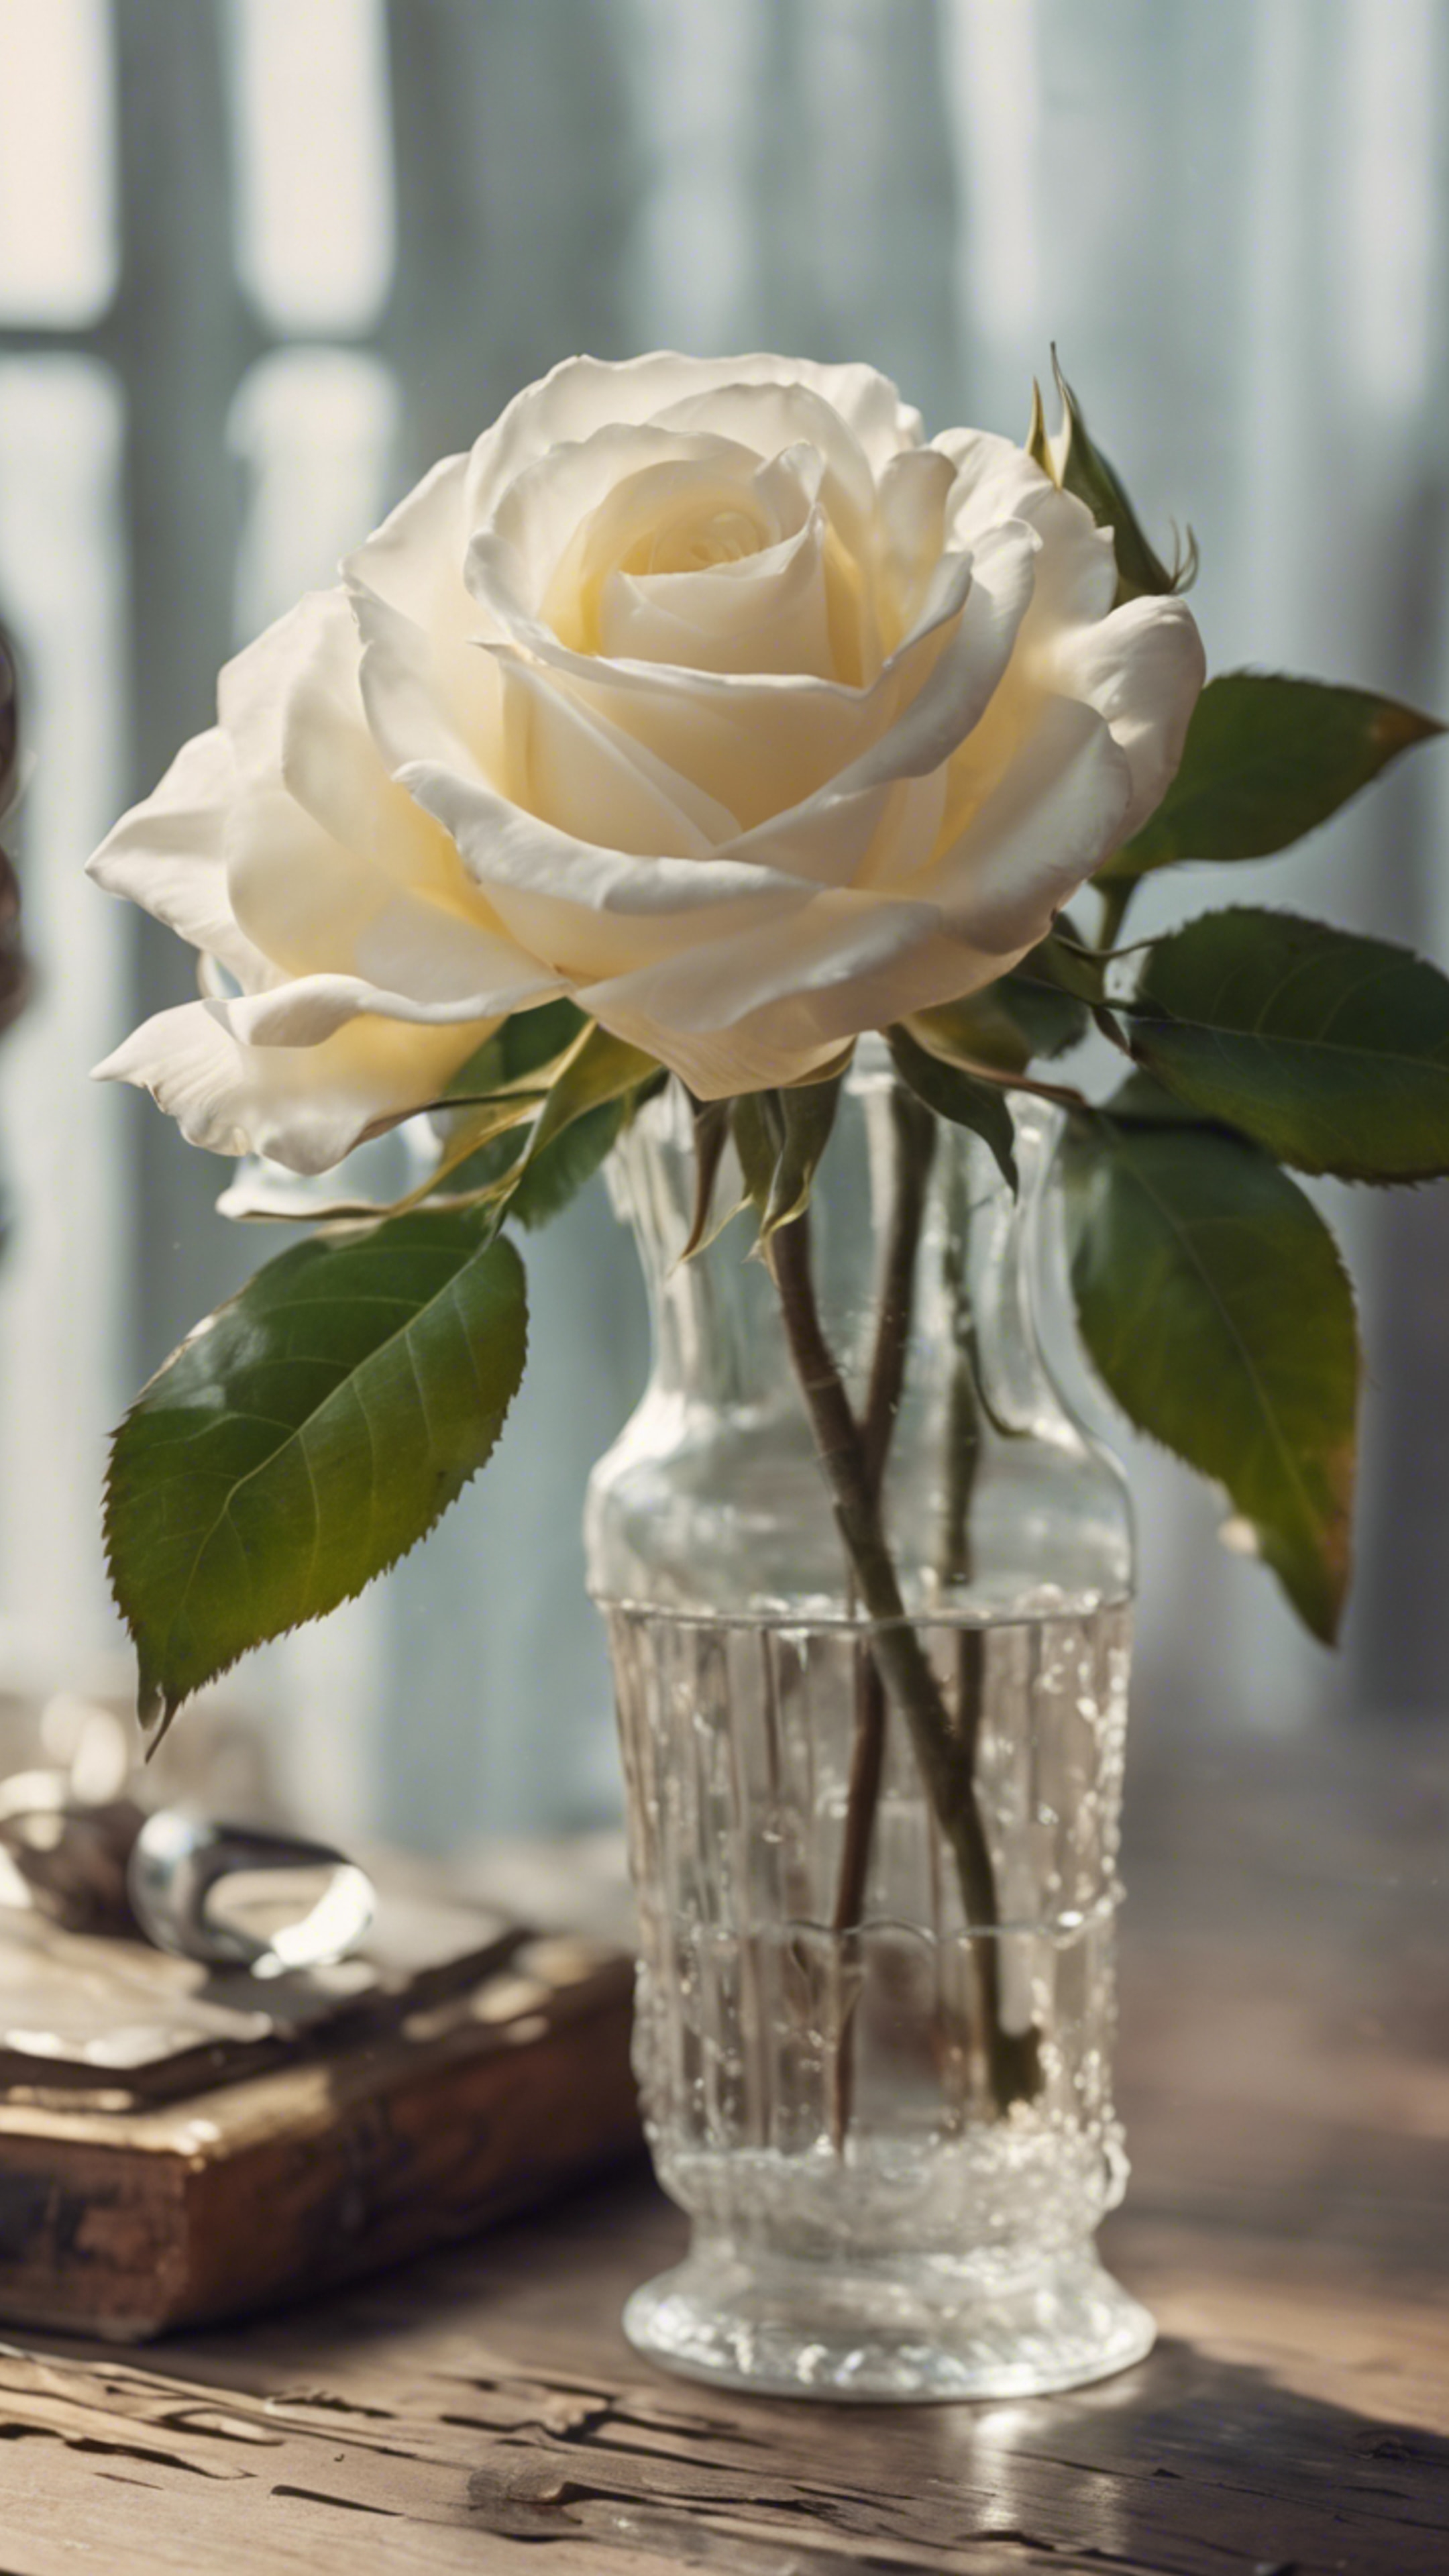 A soft white rose in a vintage glass vase on an antique wooden table. Tapeta[fc4486b9e2ee4669bbfe]